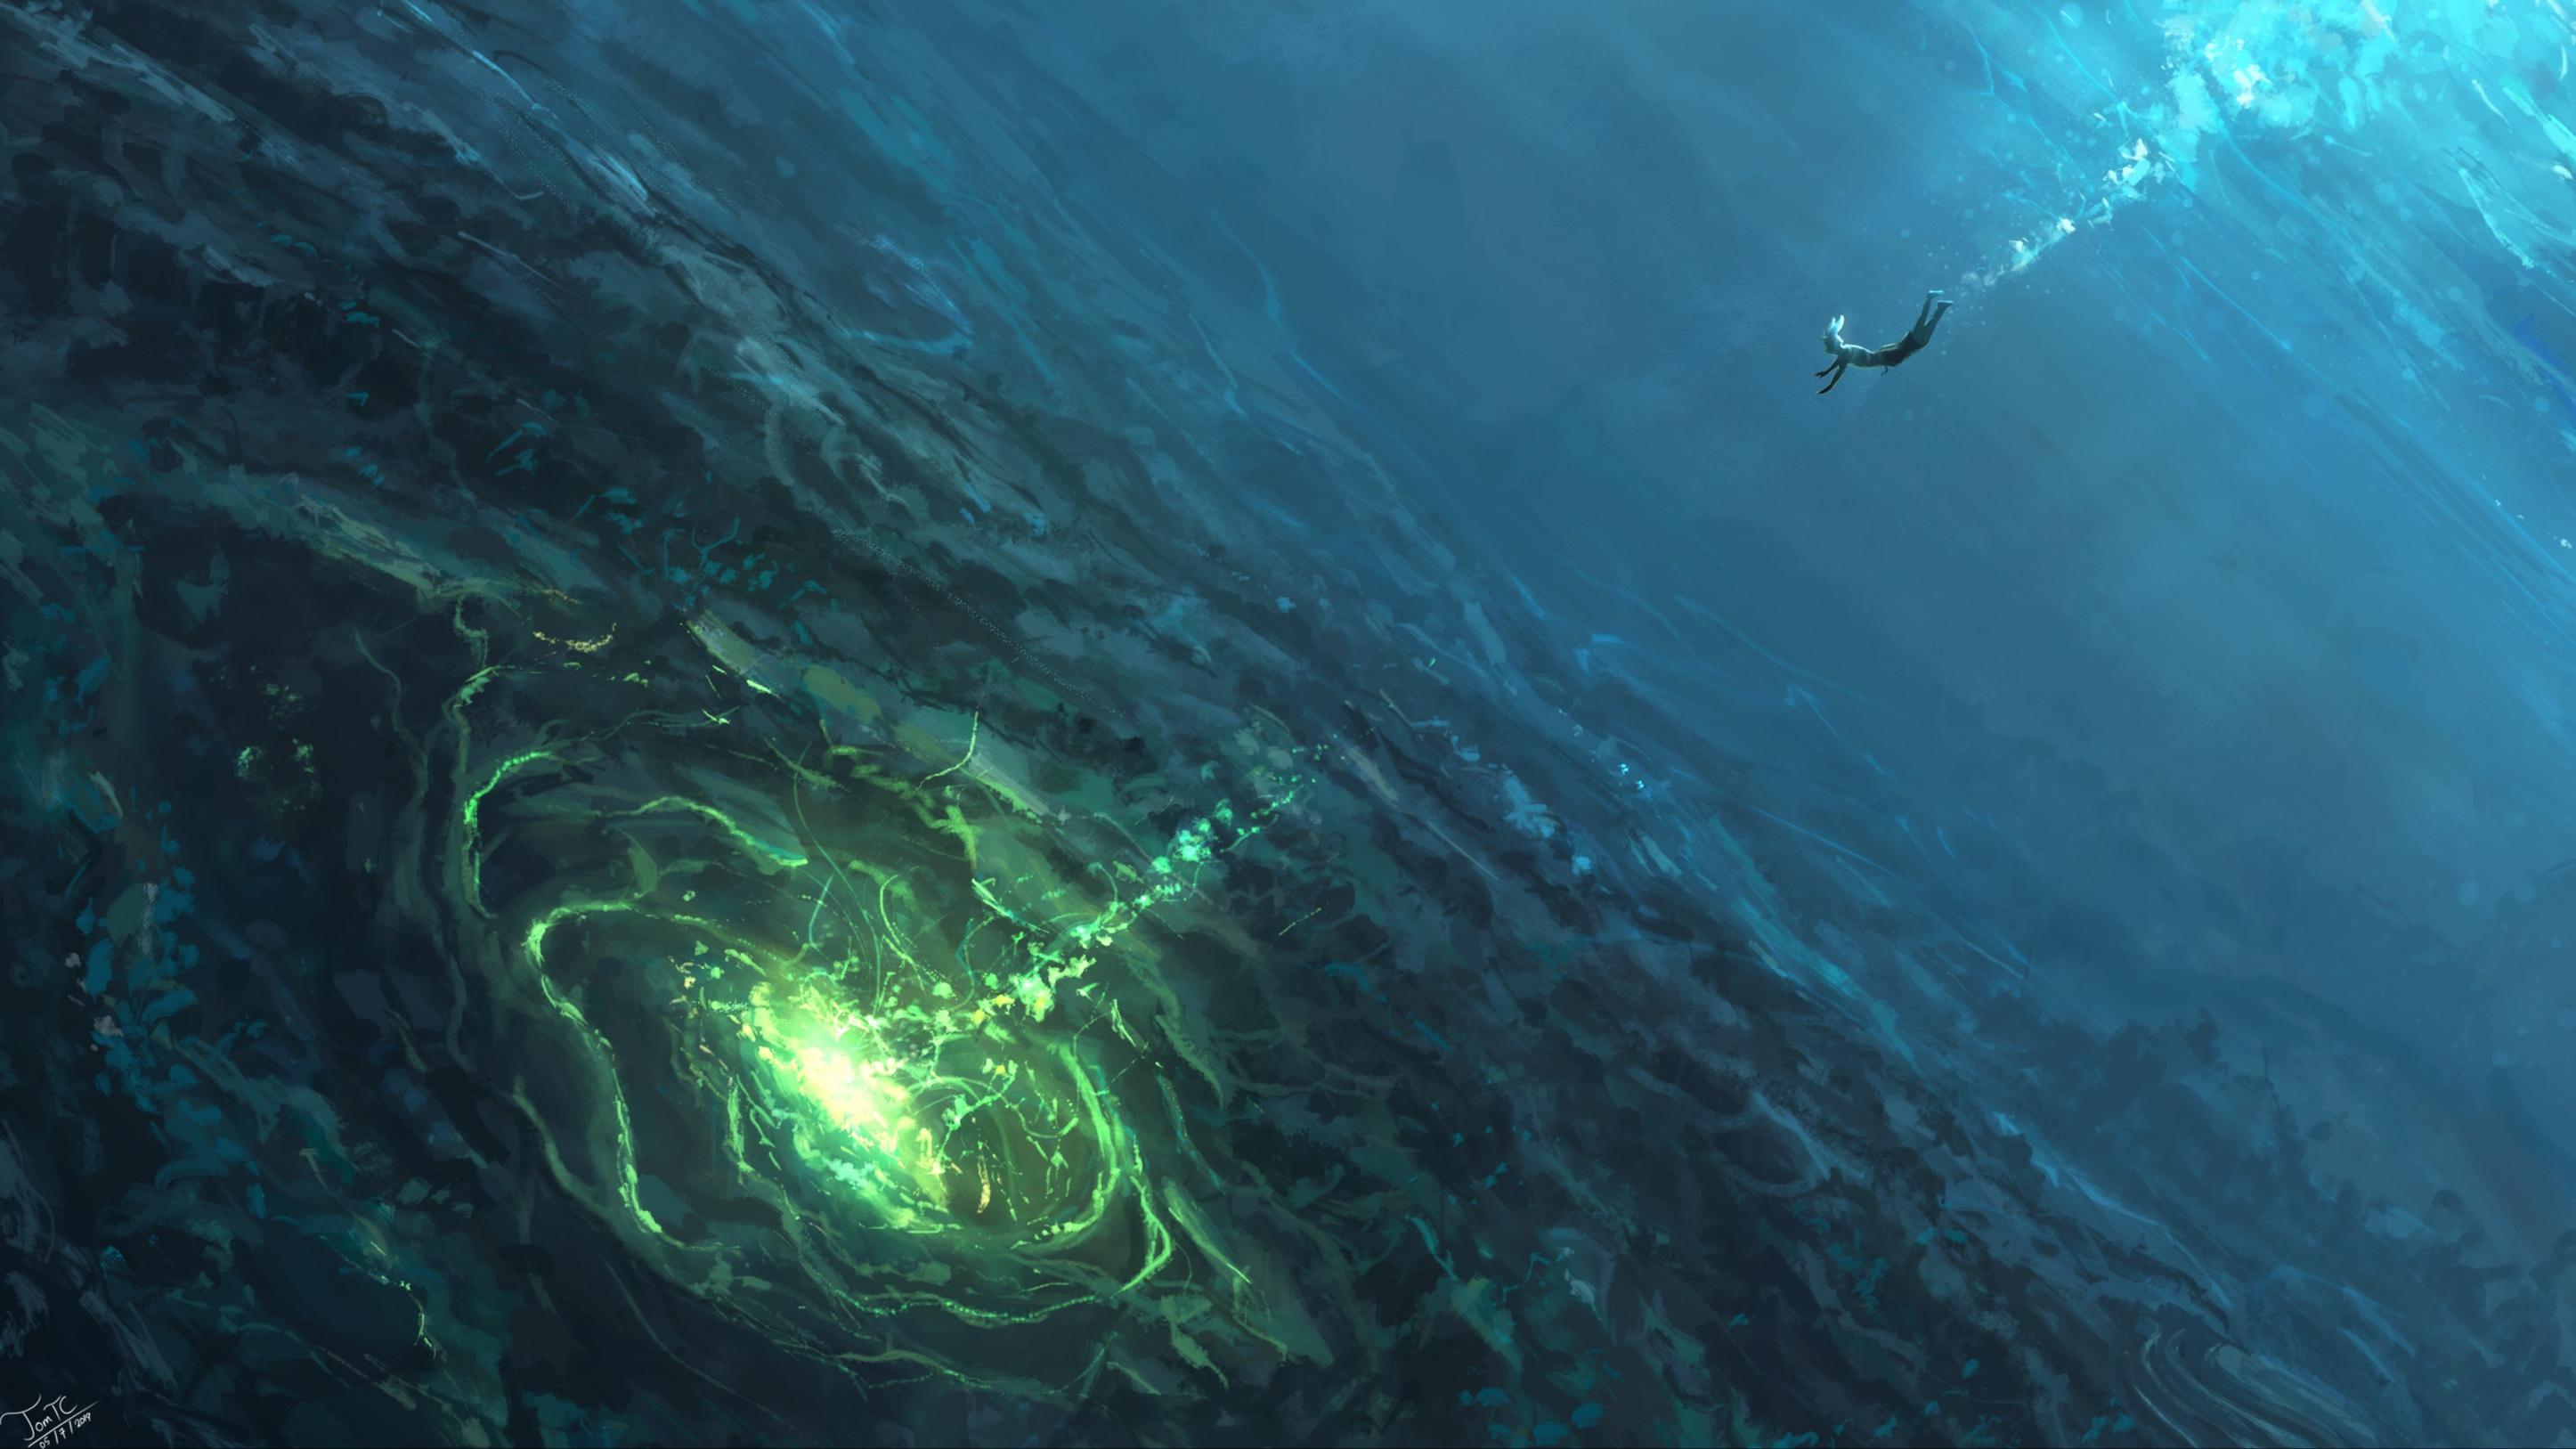 A painting of the ocean with some fish in it - Underwater